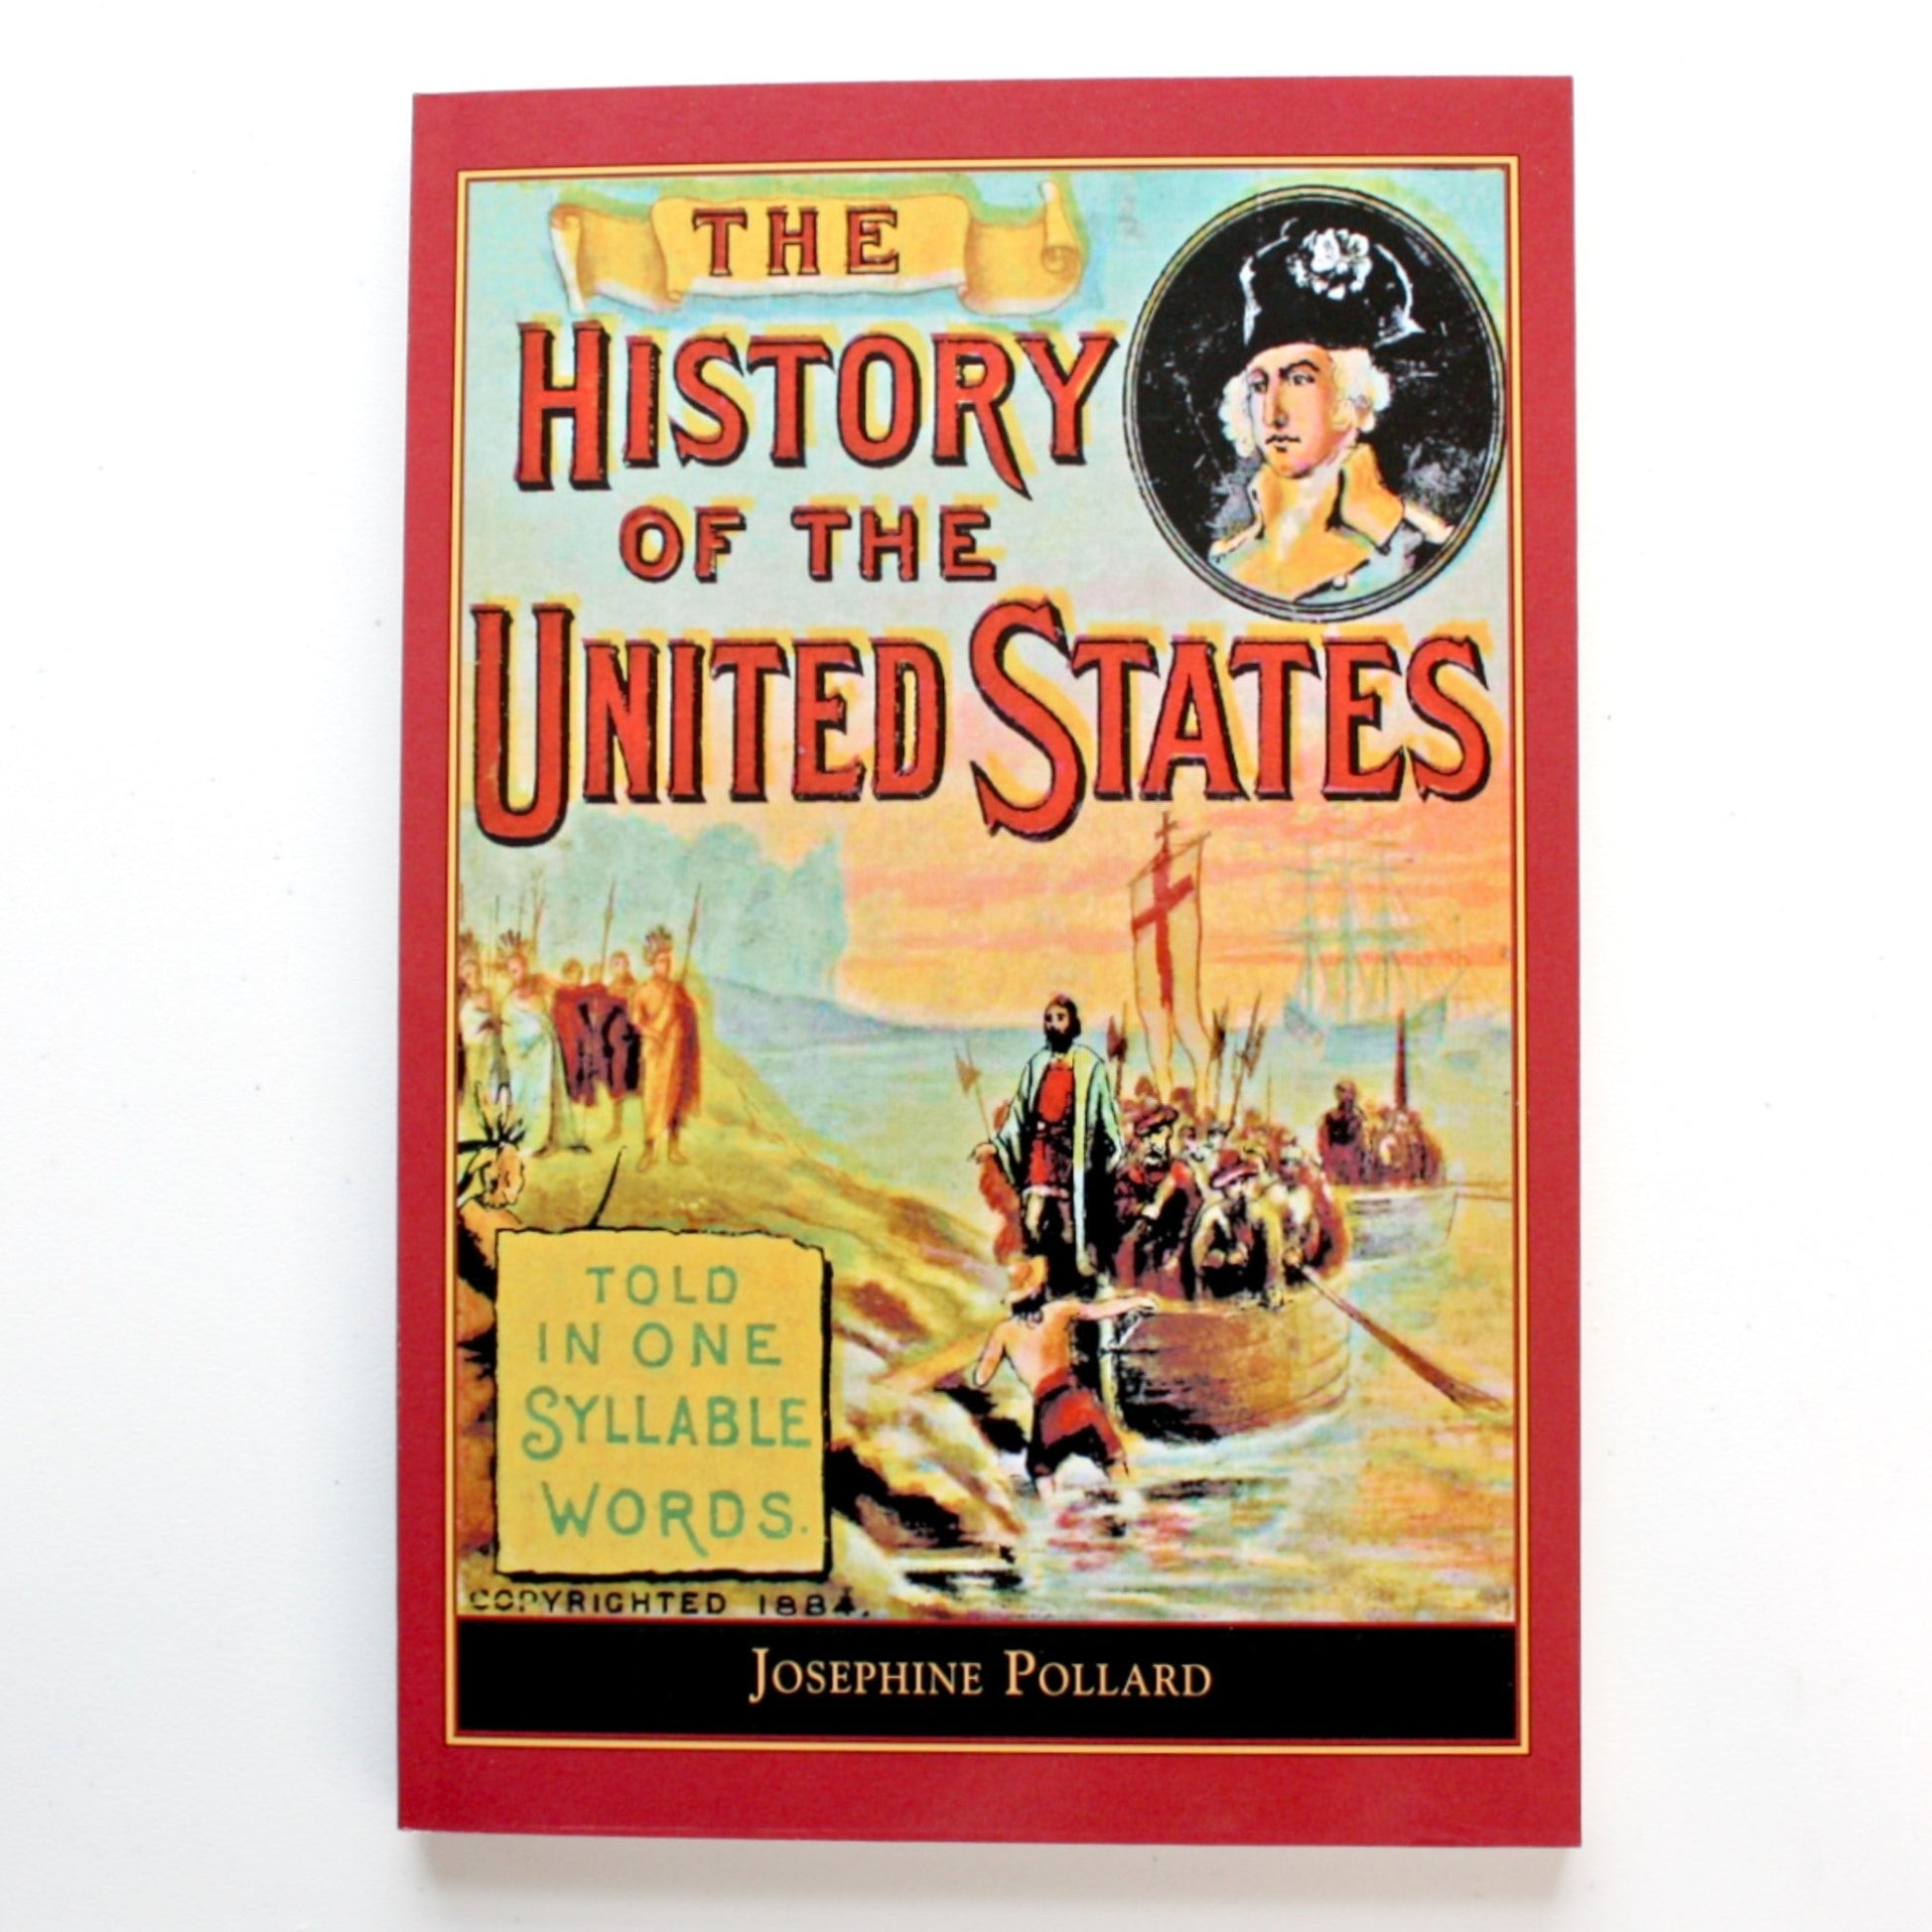 The History of the U.S. Told in One Syllable Words - Made in the USA